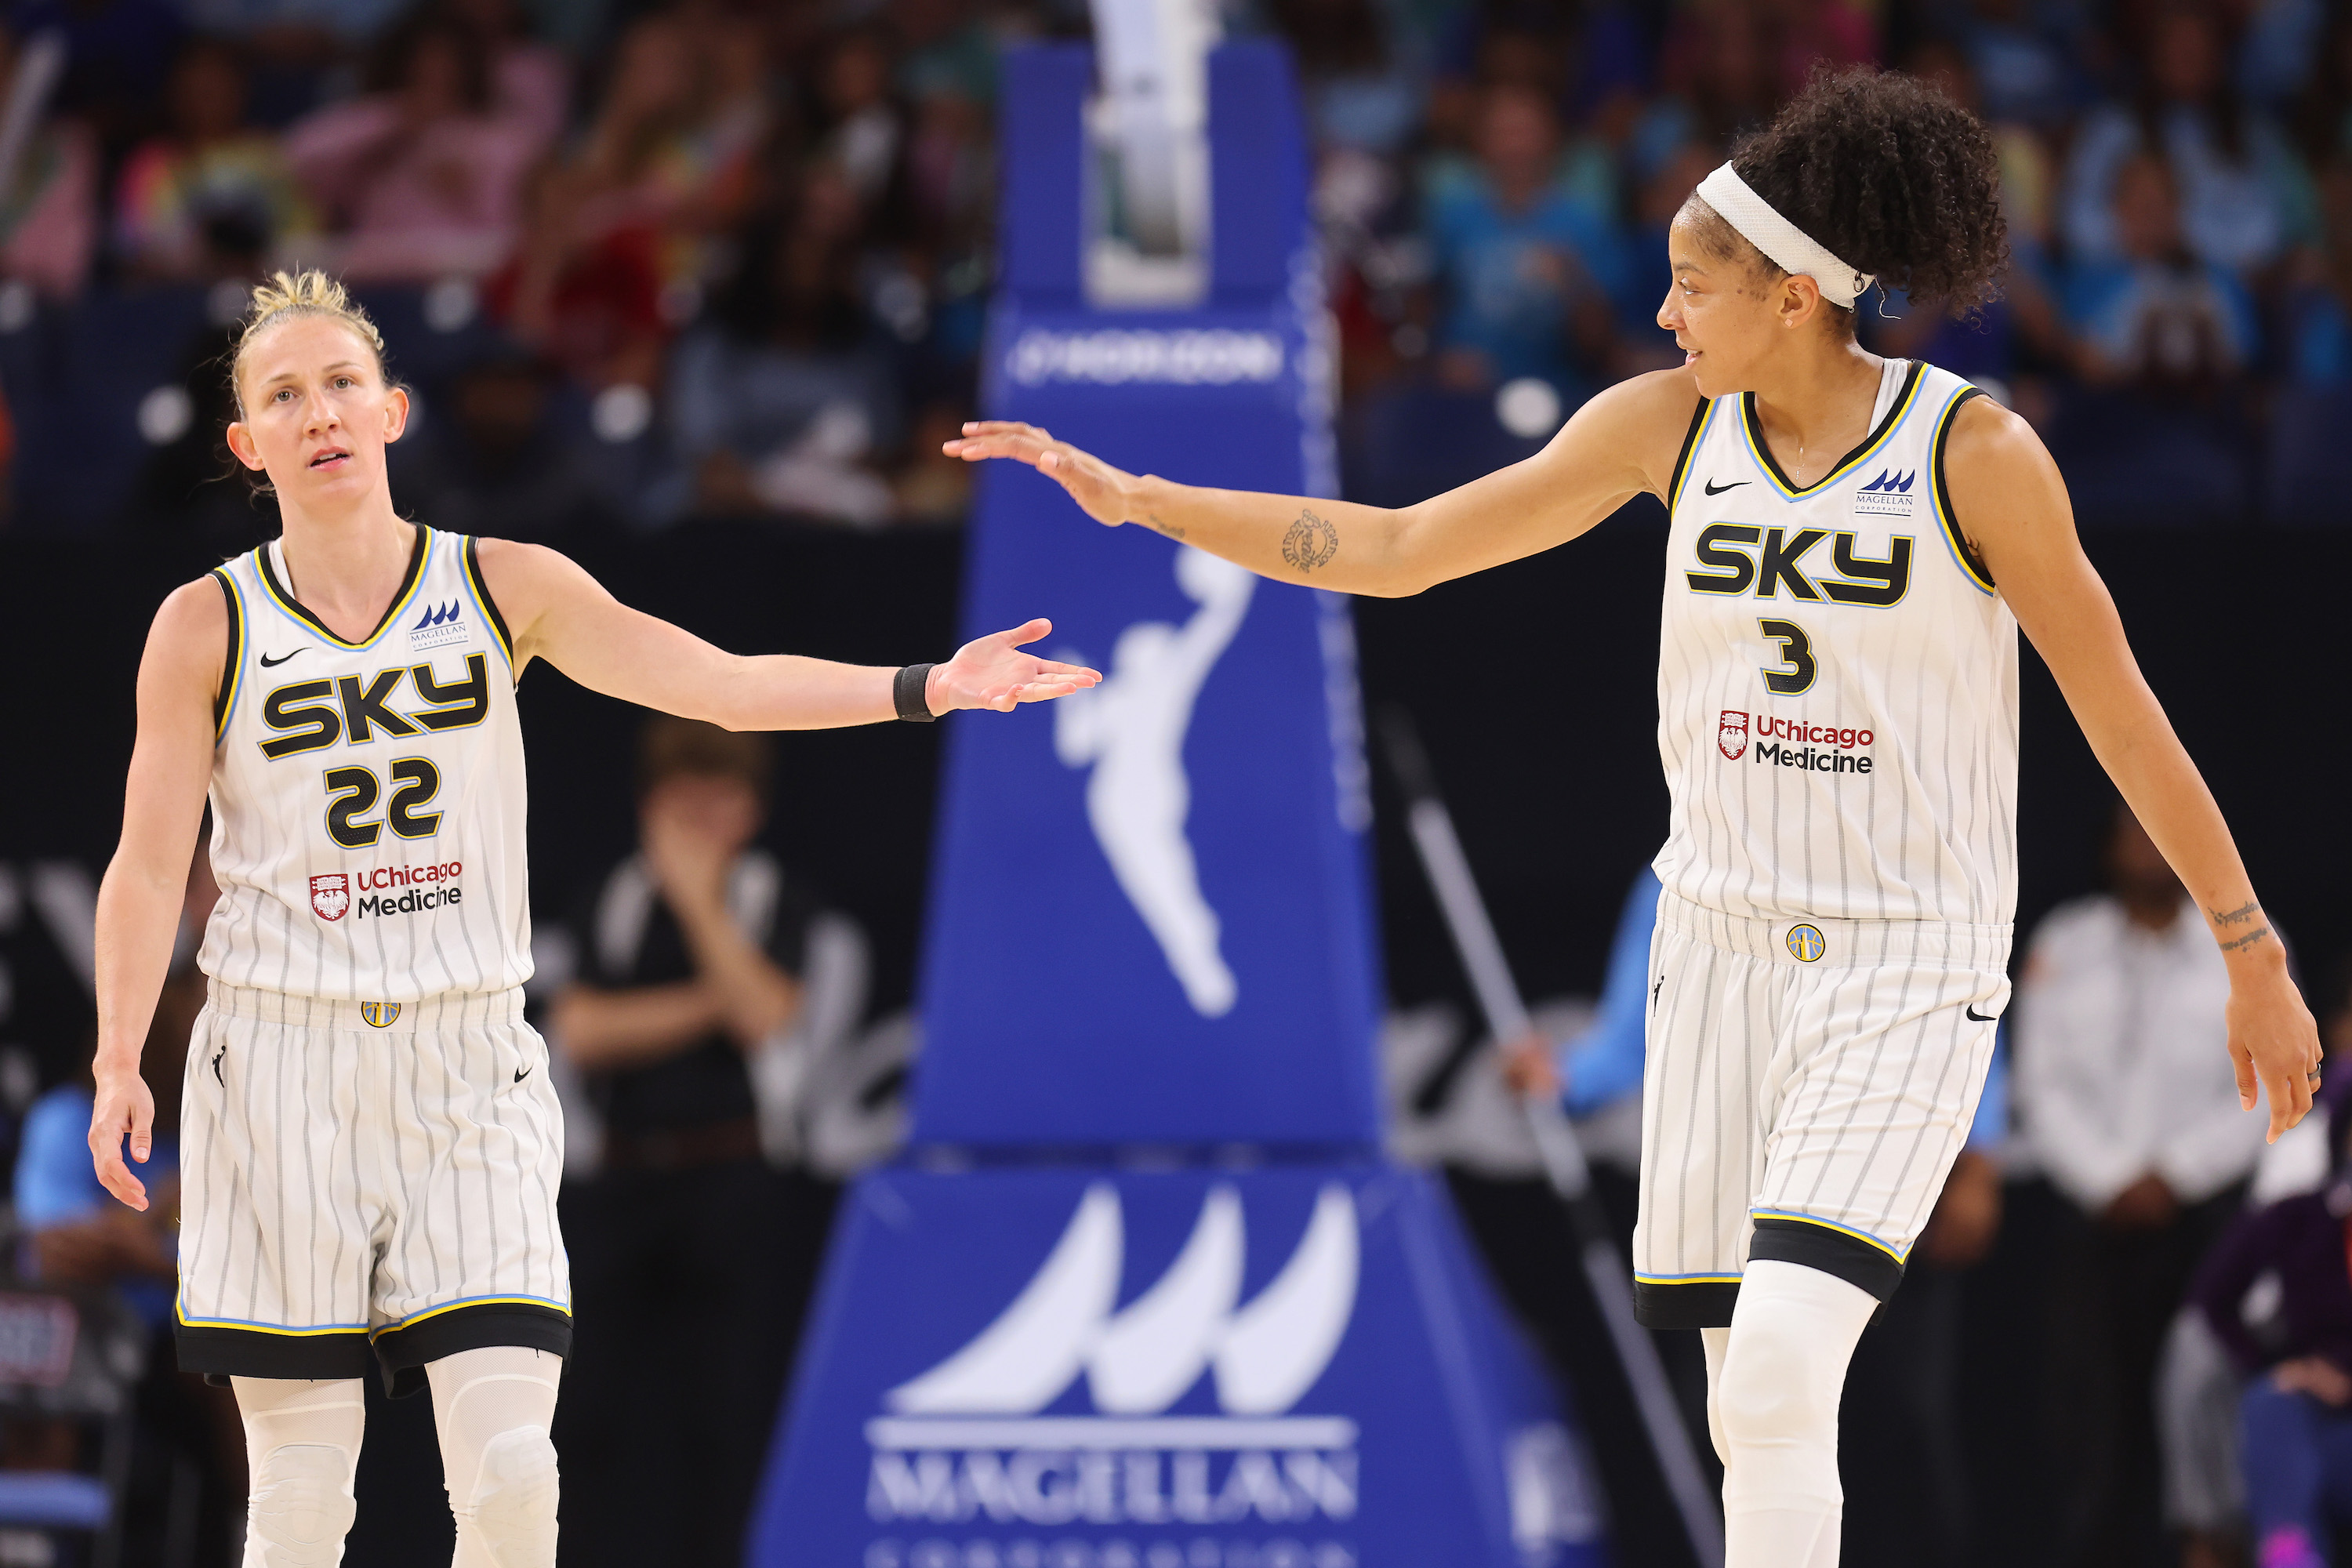 CHICAGO, ILLINOIS - AUGUST 02: Courtney Vandersloot #22 and Candace Parker #3 of the Chicago Sky celebrate against the Dallas Wings during the second half at Wintrust Arena on August 02, 2022 in Chicago, Illinois.